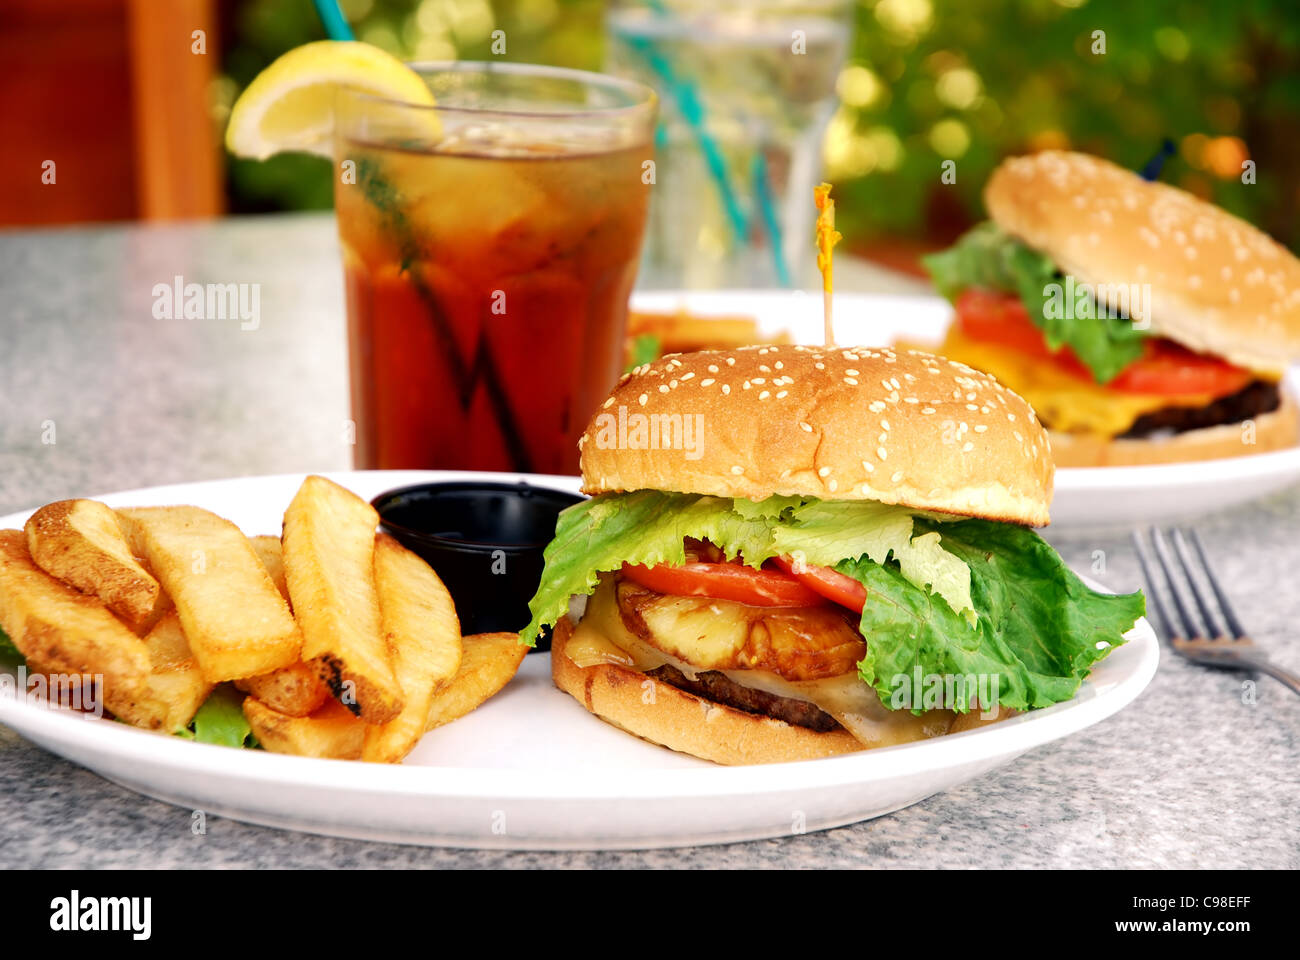 Teriyaki burger with large French fries at an outdoor restaurant Stock Photo